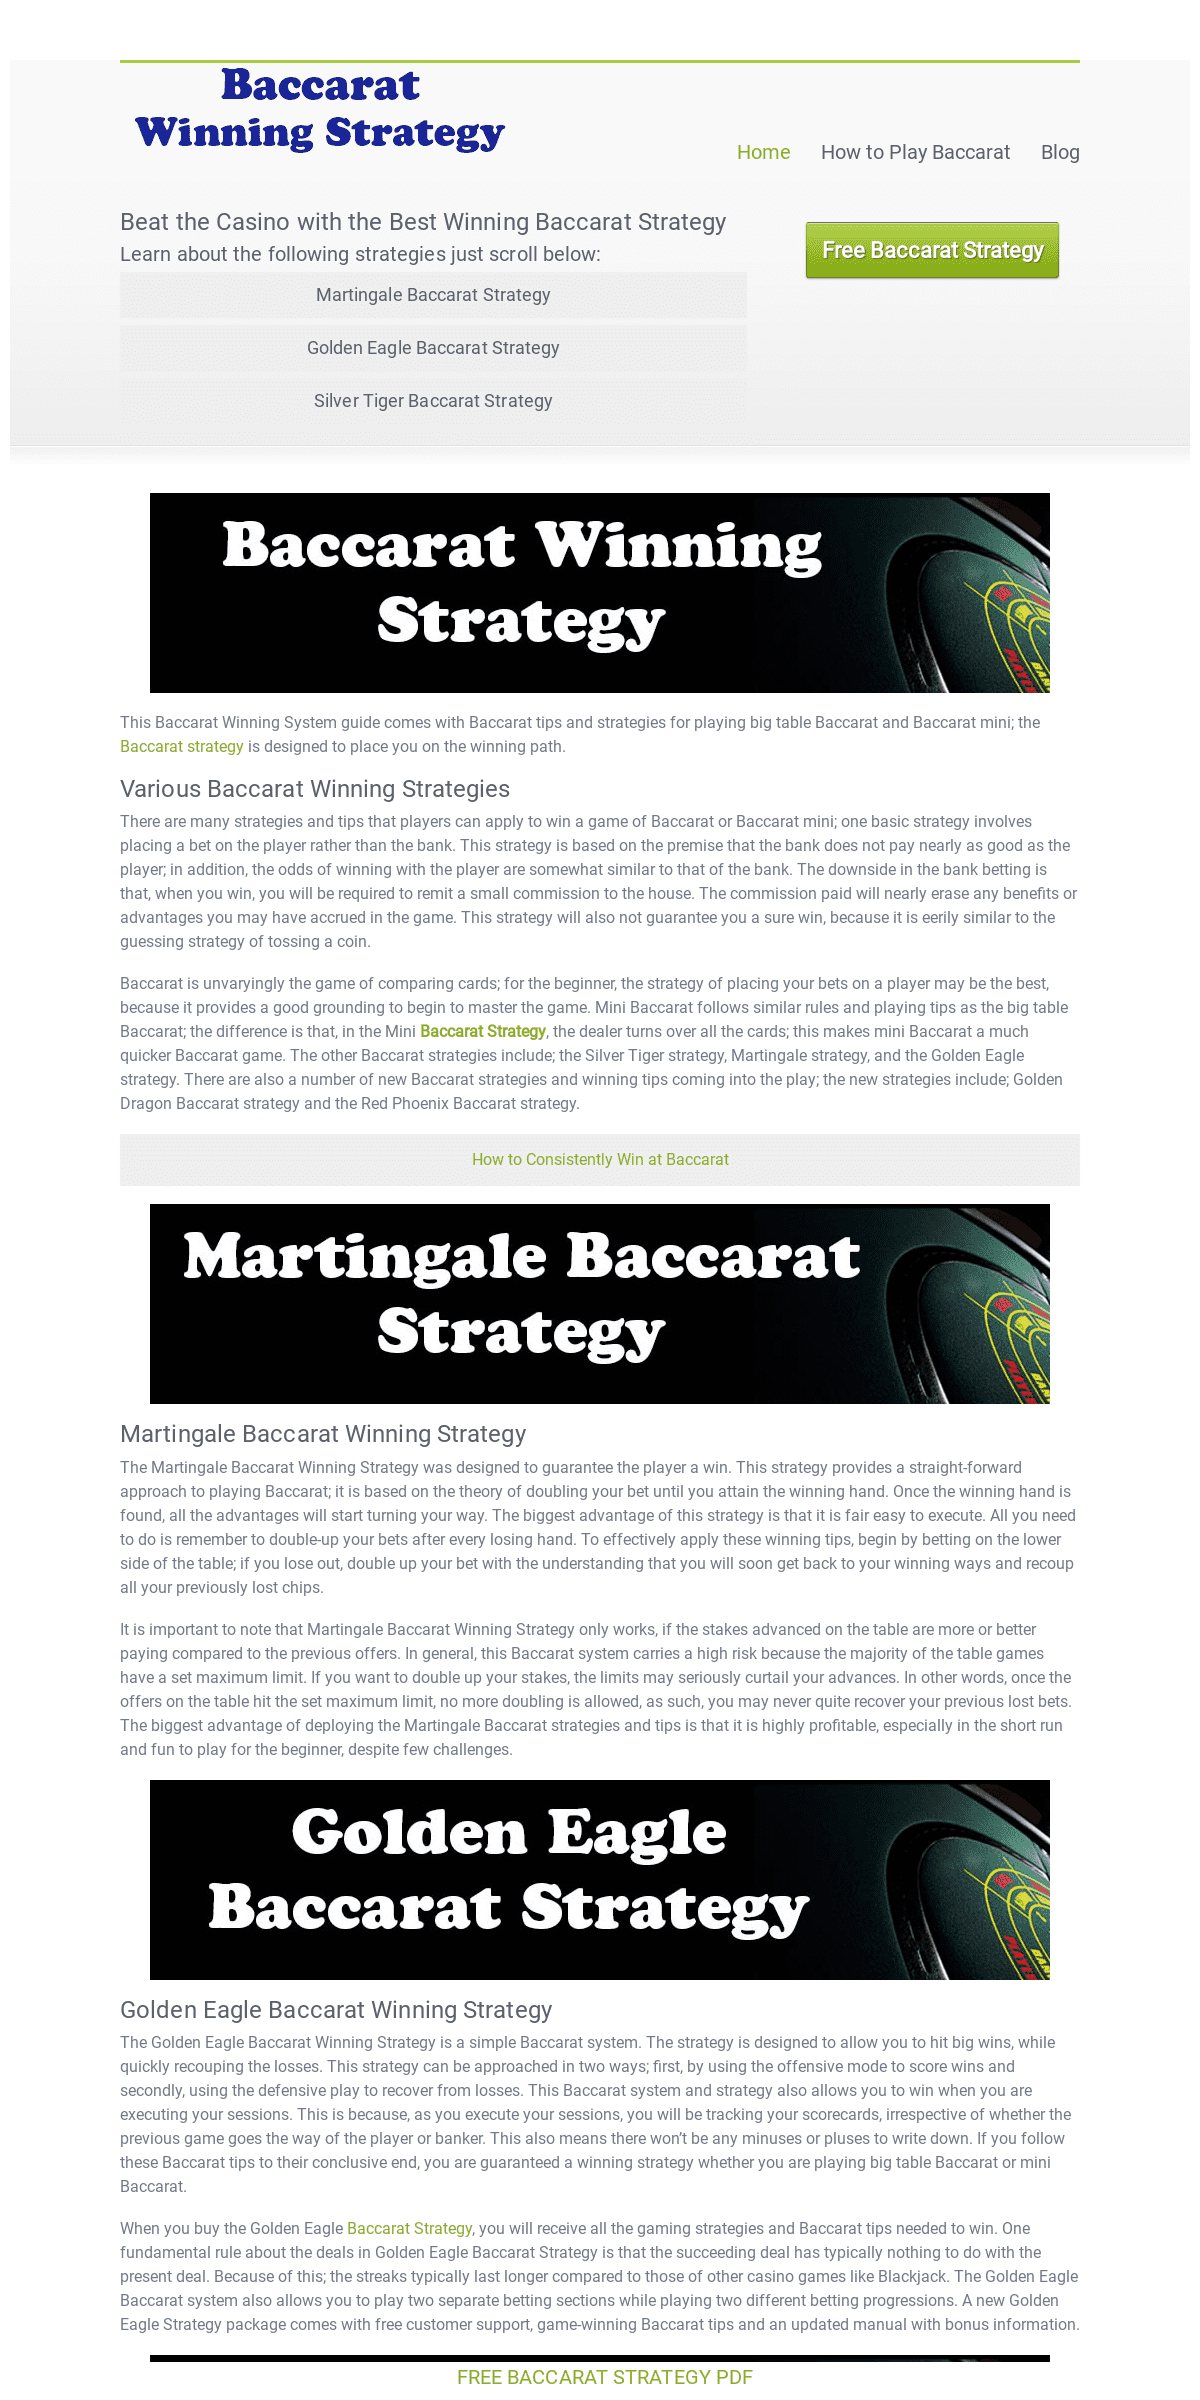 A complete backup of baccaratwinningstrategy.com